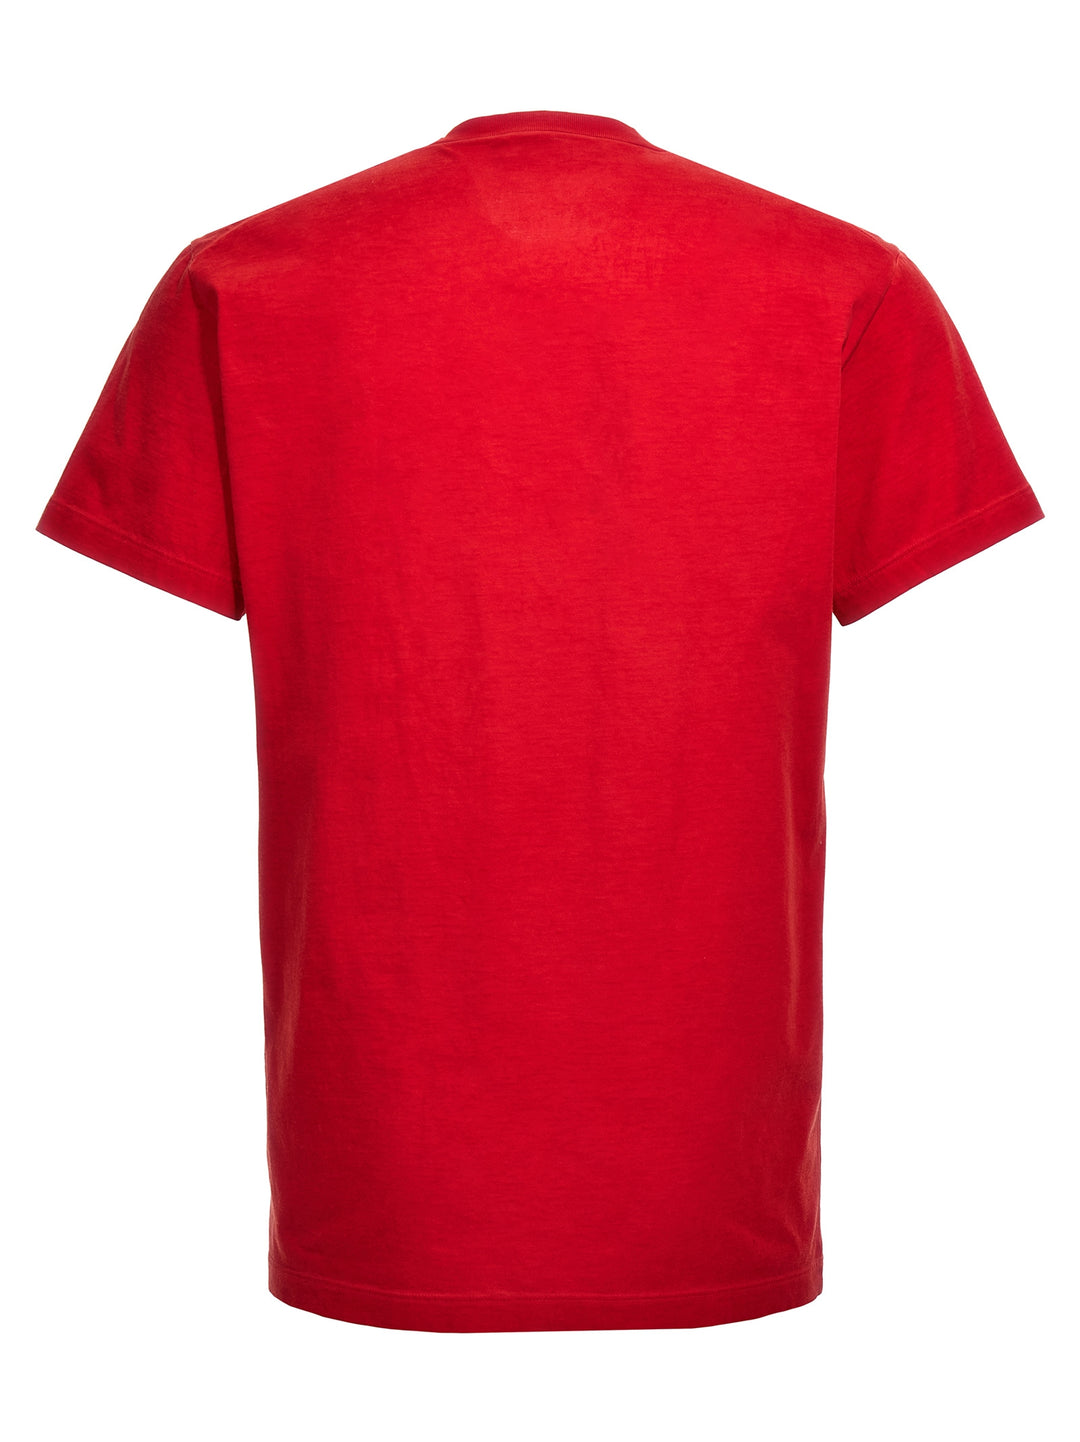 Vip T Shirt Rosso